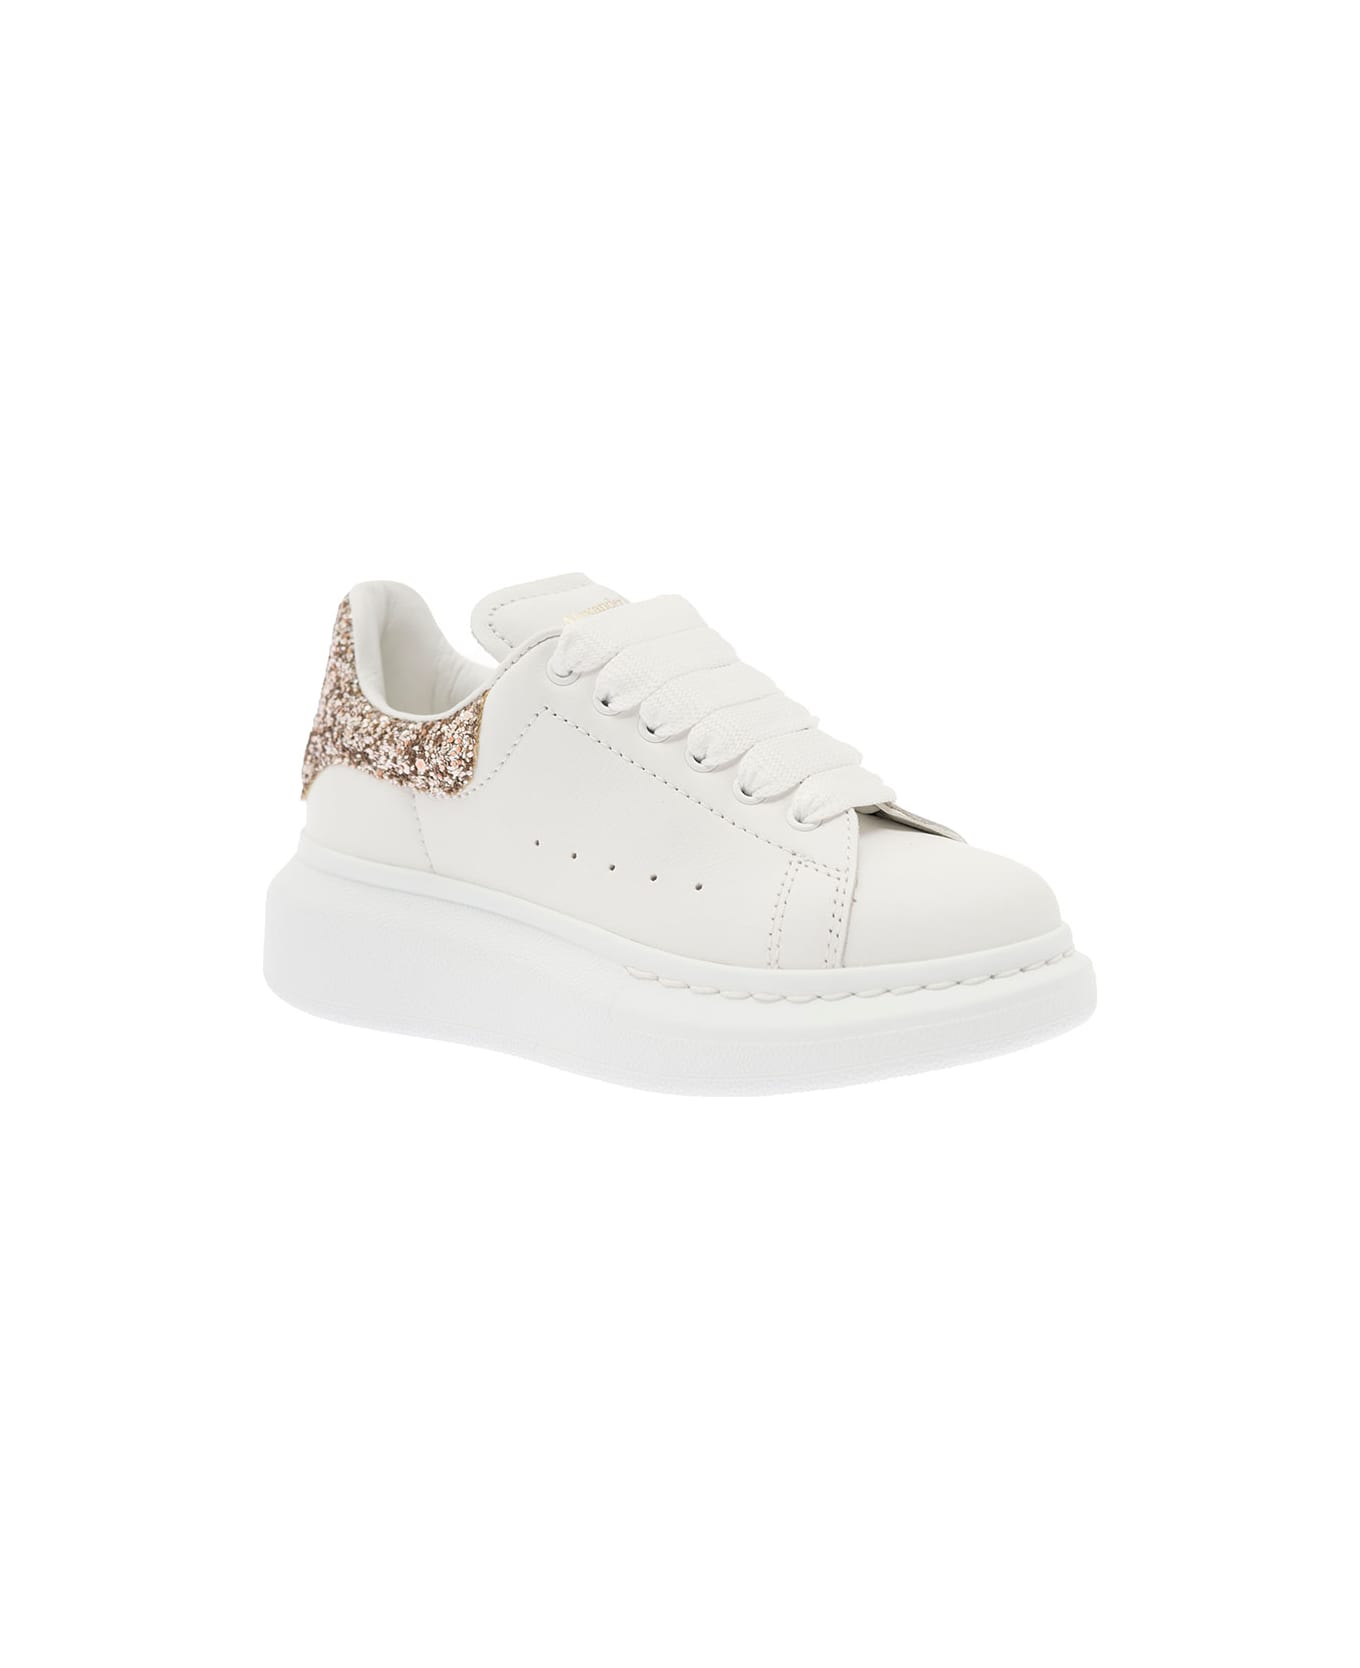 Alexander McQueen White Sneaker With Contrasted Heel With Glitter Detailing In Calf Leather - Black